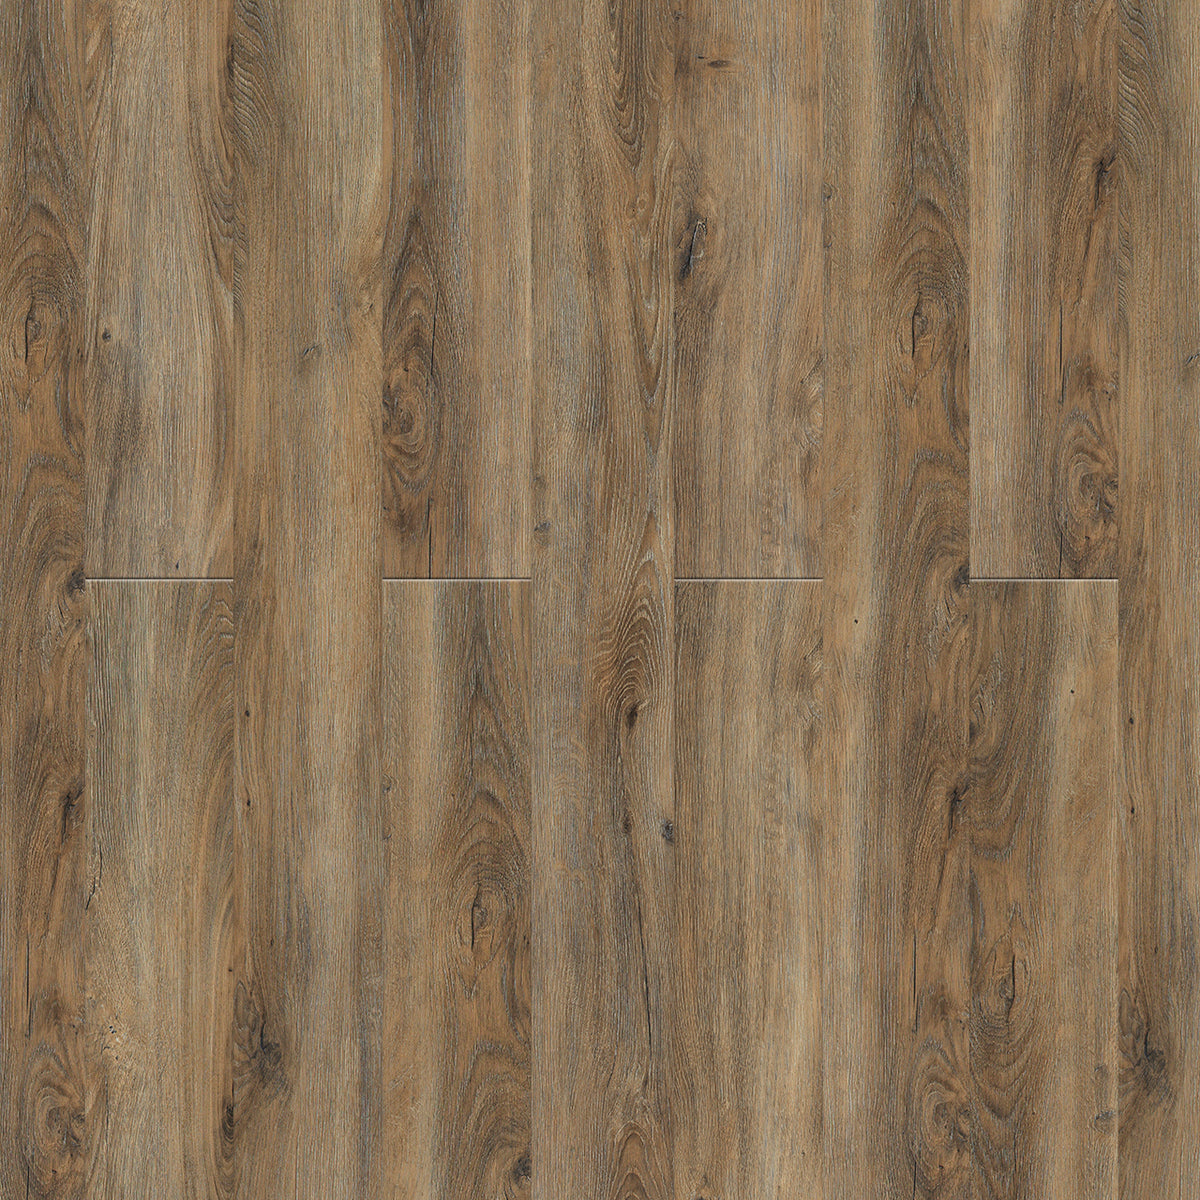 Engineered Floors - Triumph Collection - The New Standard II - 6 in. x 48 in. - Bay of Plenty